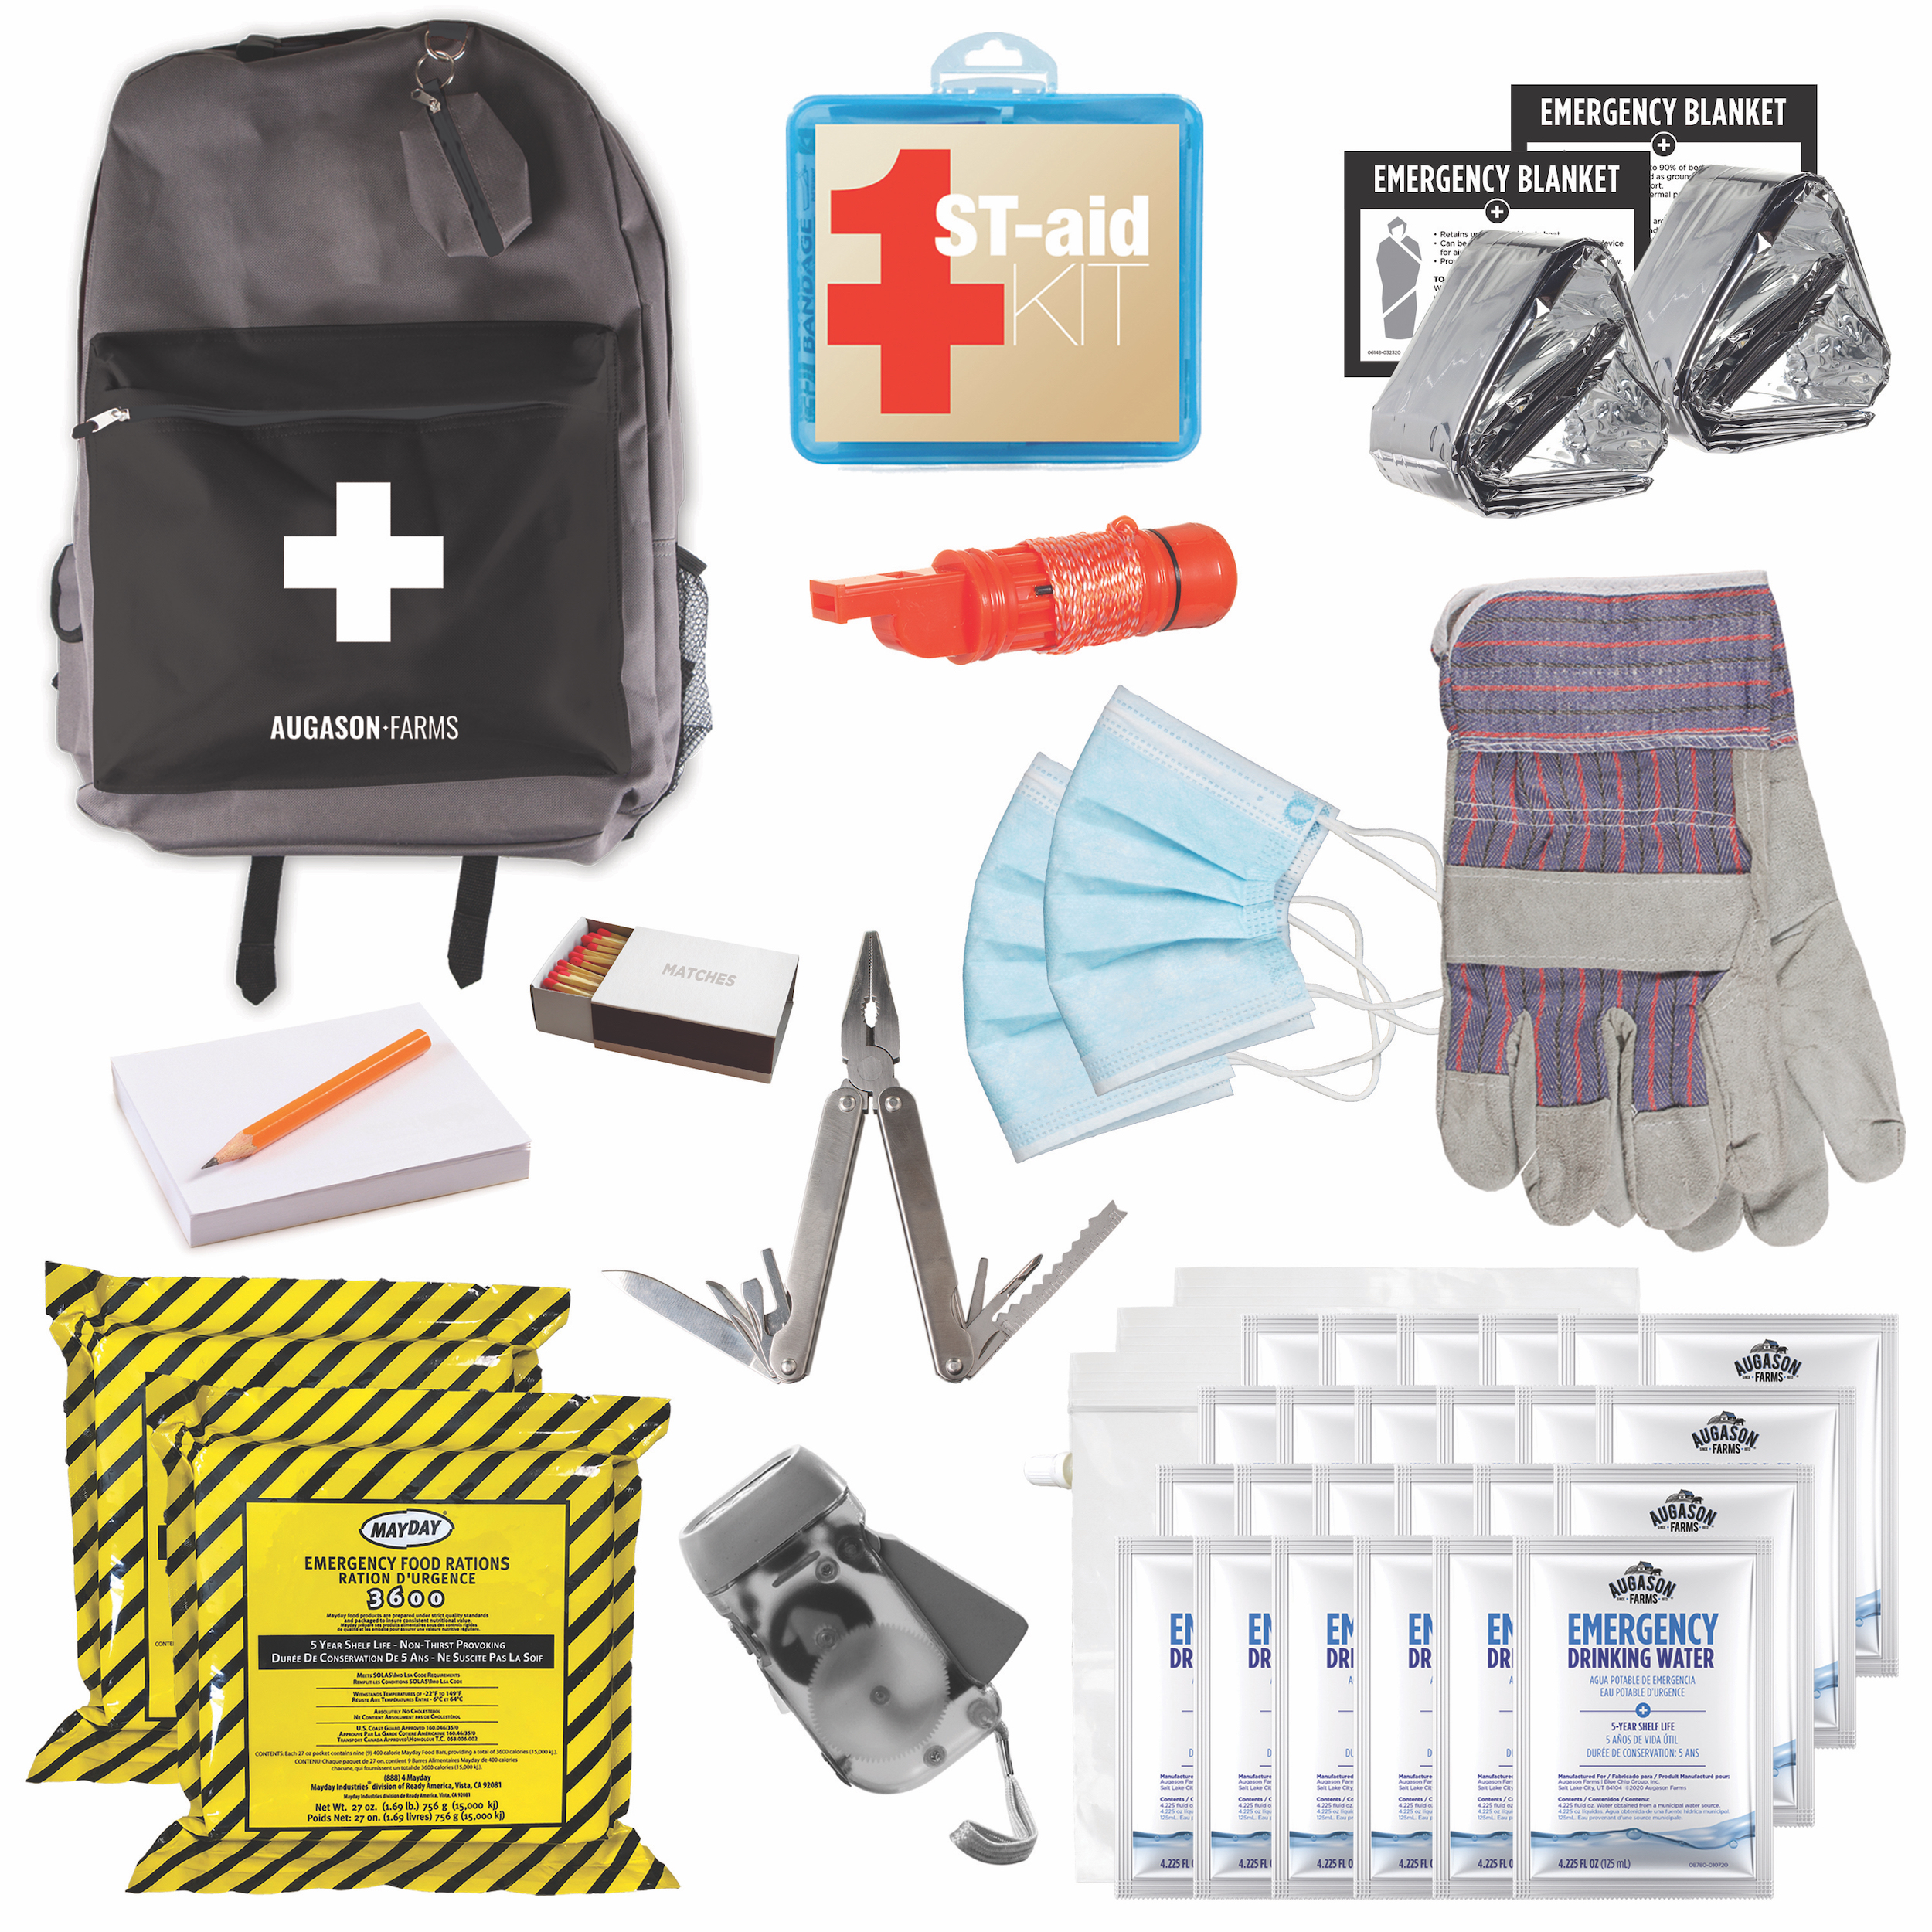 A Augason Farms 72-Hour 2-Person Survival Pack Bug Out Bag - (SHIPS IN 1-2 WEEKS) with gloves and other items.